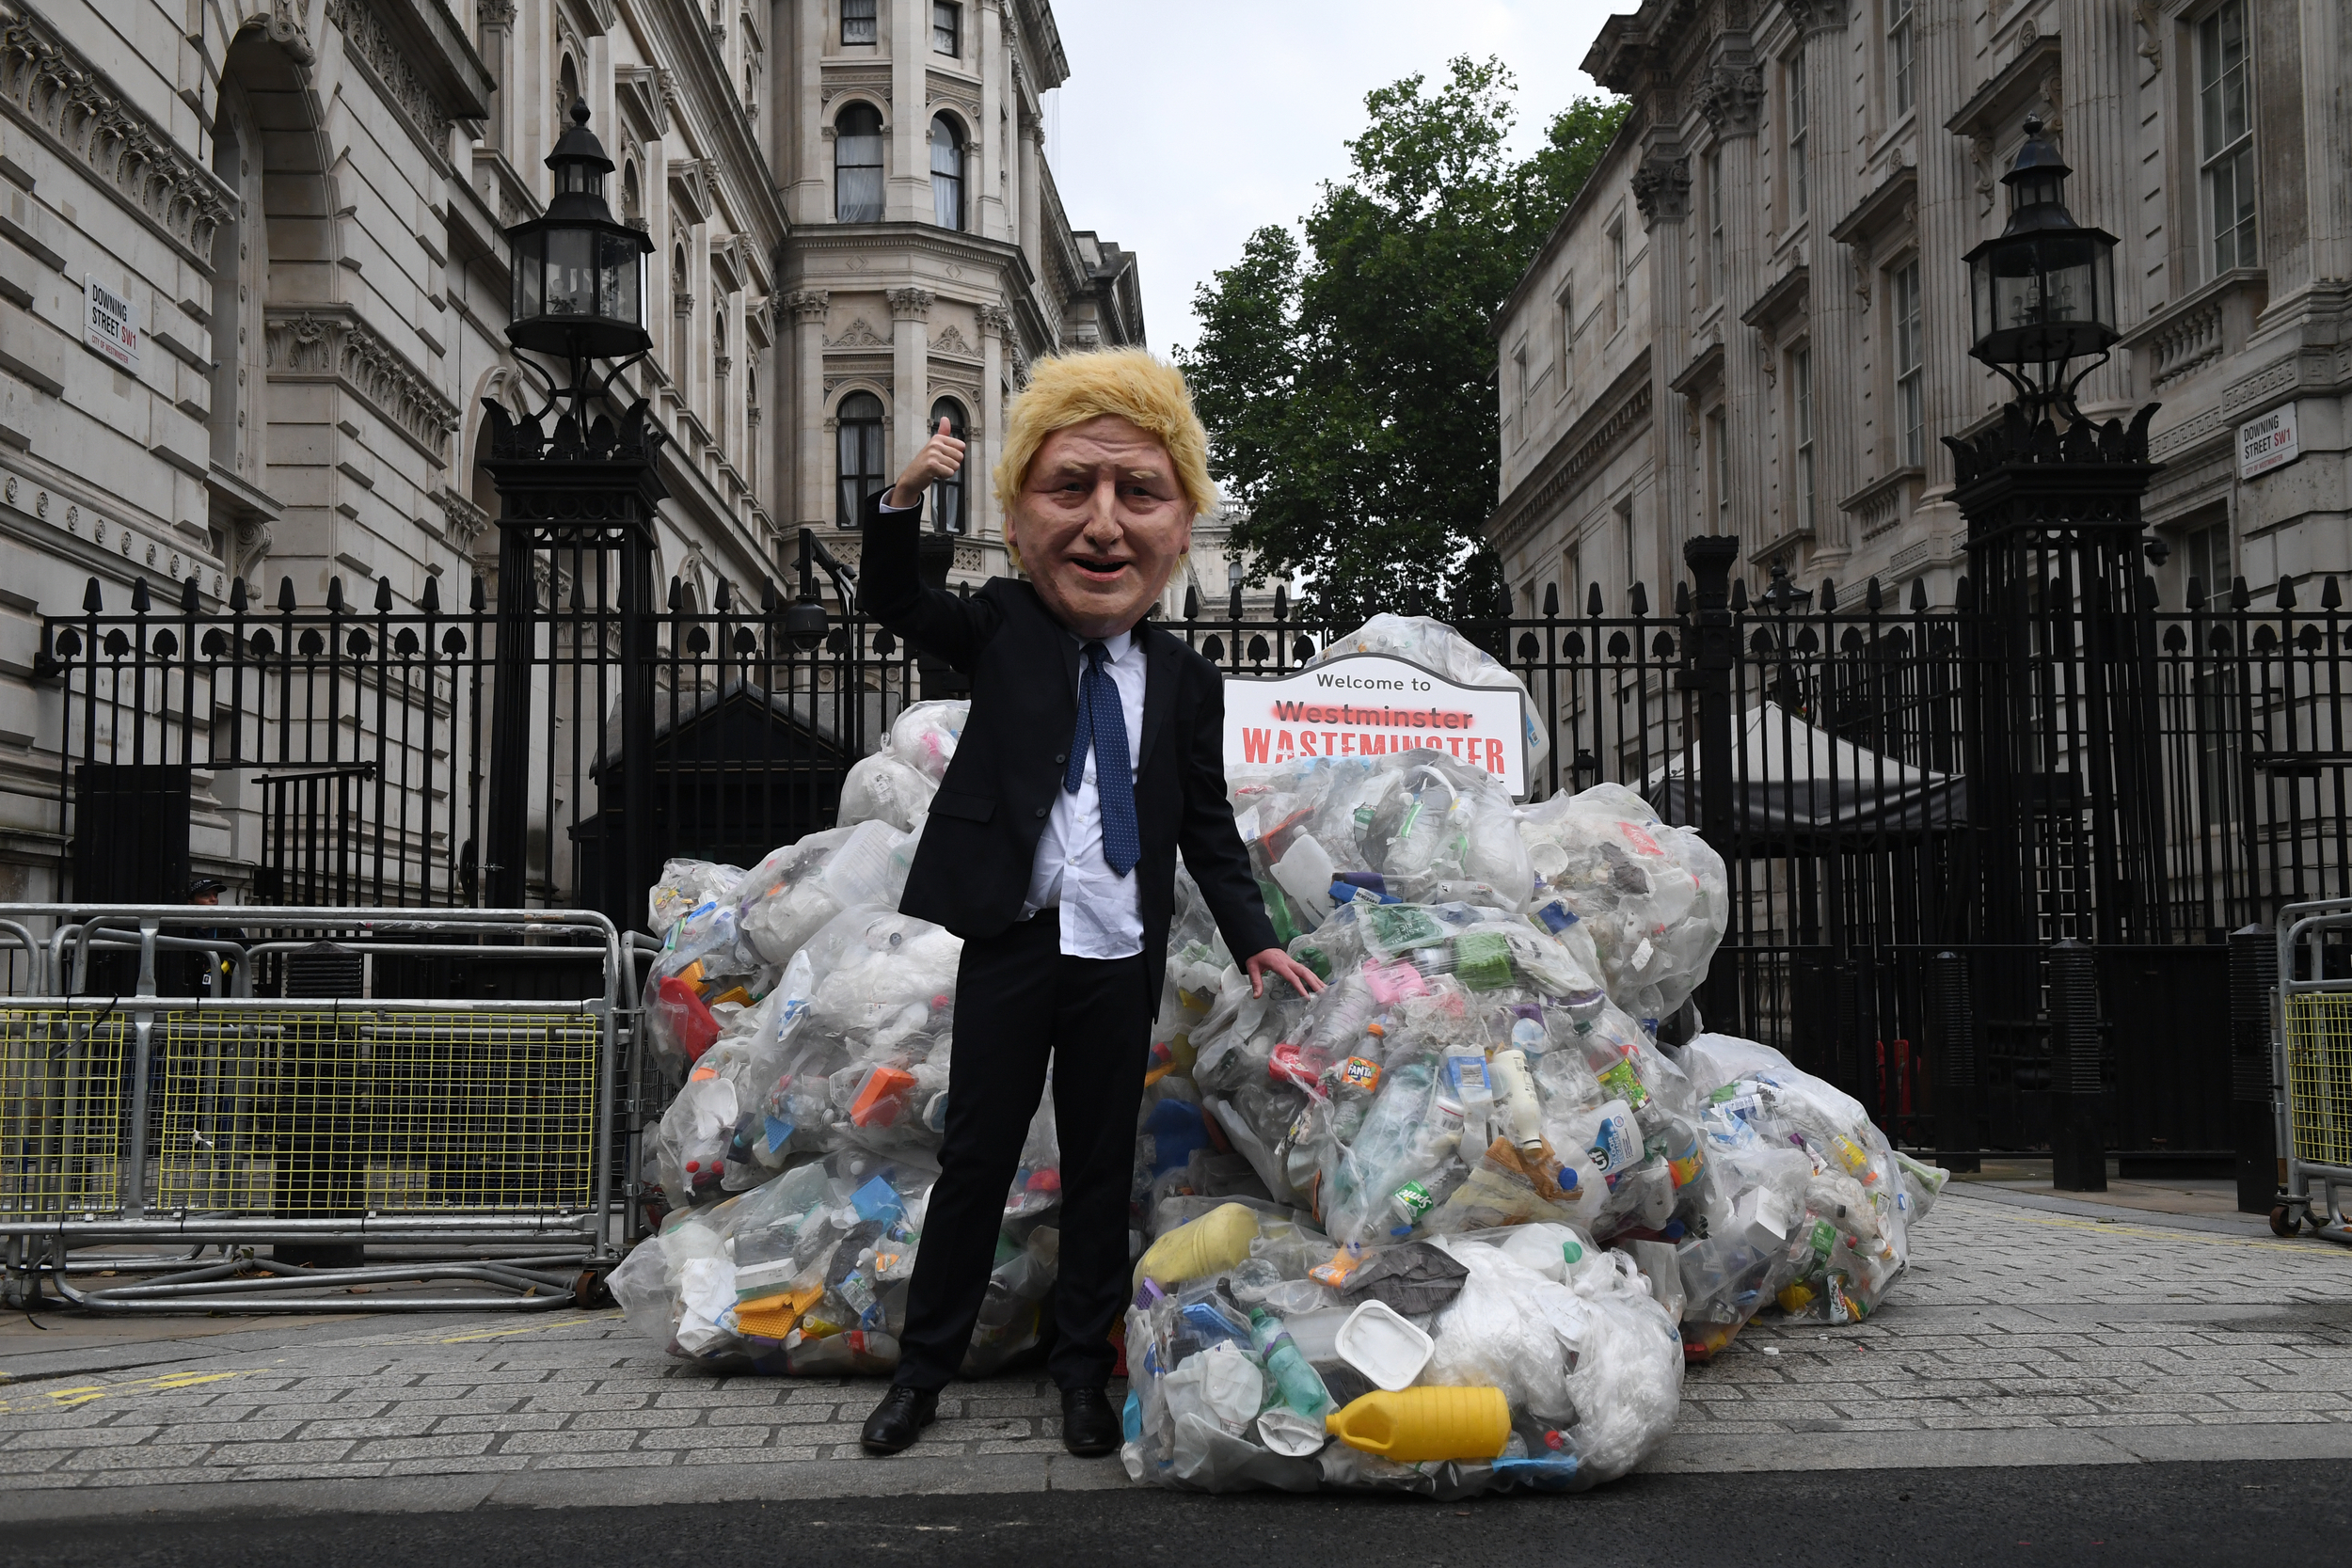 A suited figure in a caricatured Boris Johnson mask stands in front of a huge pile of transparent bin bags filled with plastic waste. In the background, the railings and buildings of Downing Street are visible.